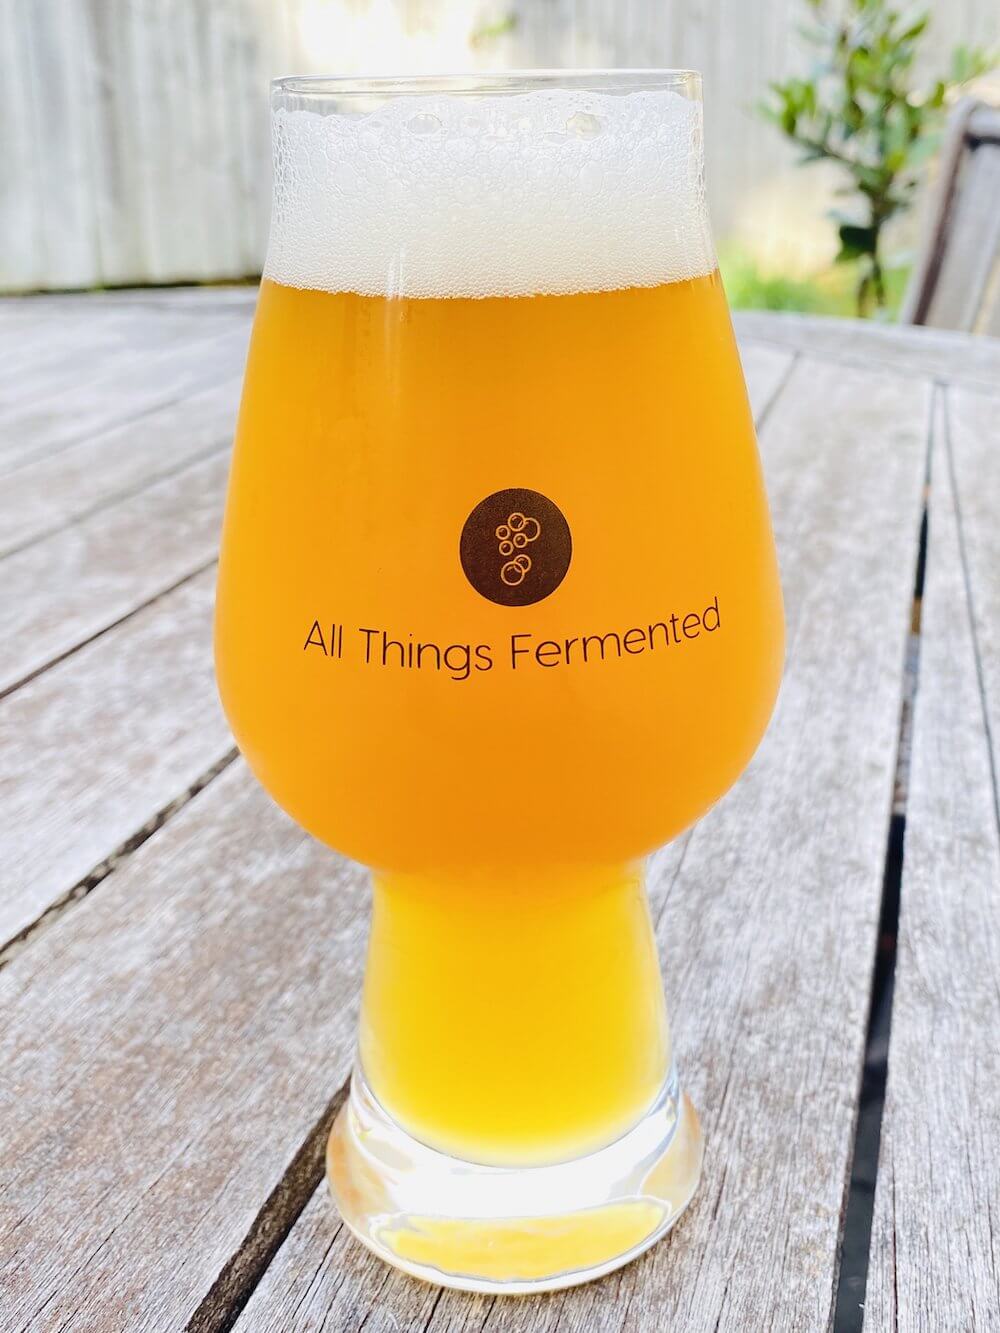 ATF Kvazy (NEIPA) - Hot Whirlpool - All Things Fermented | Home Brew Shop NZ | Supplies | Equipment